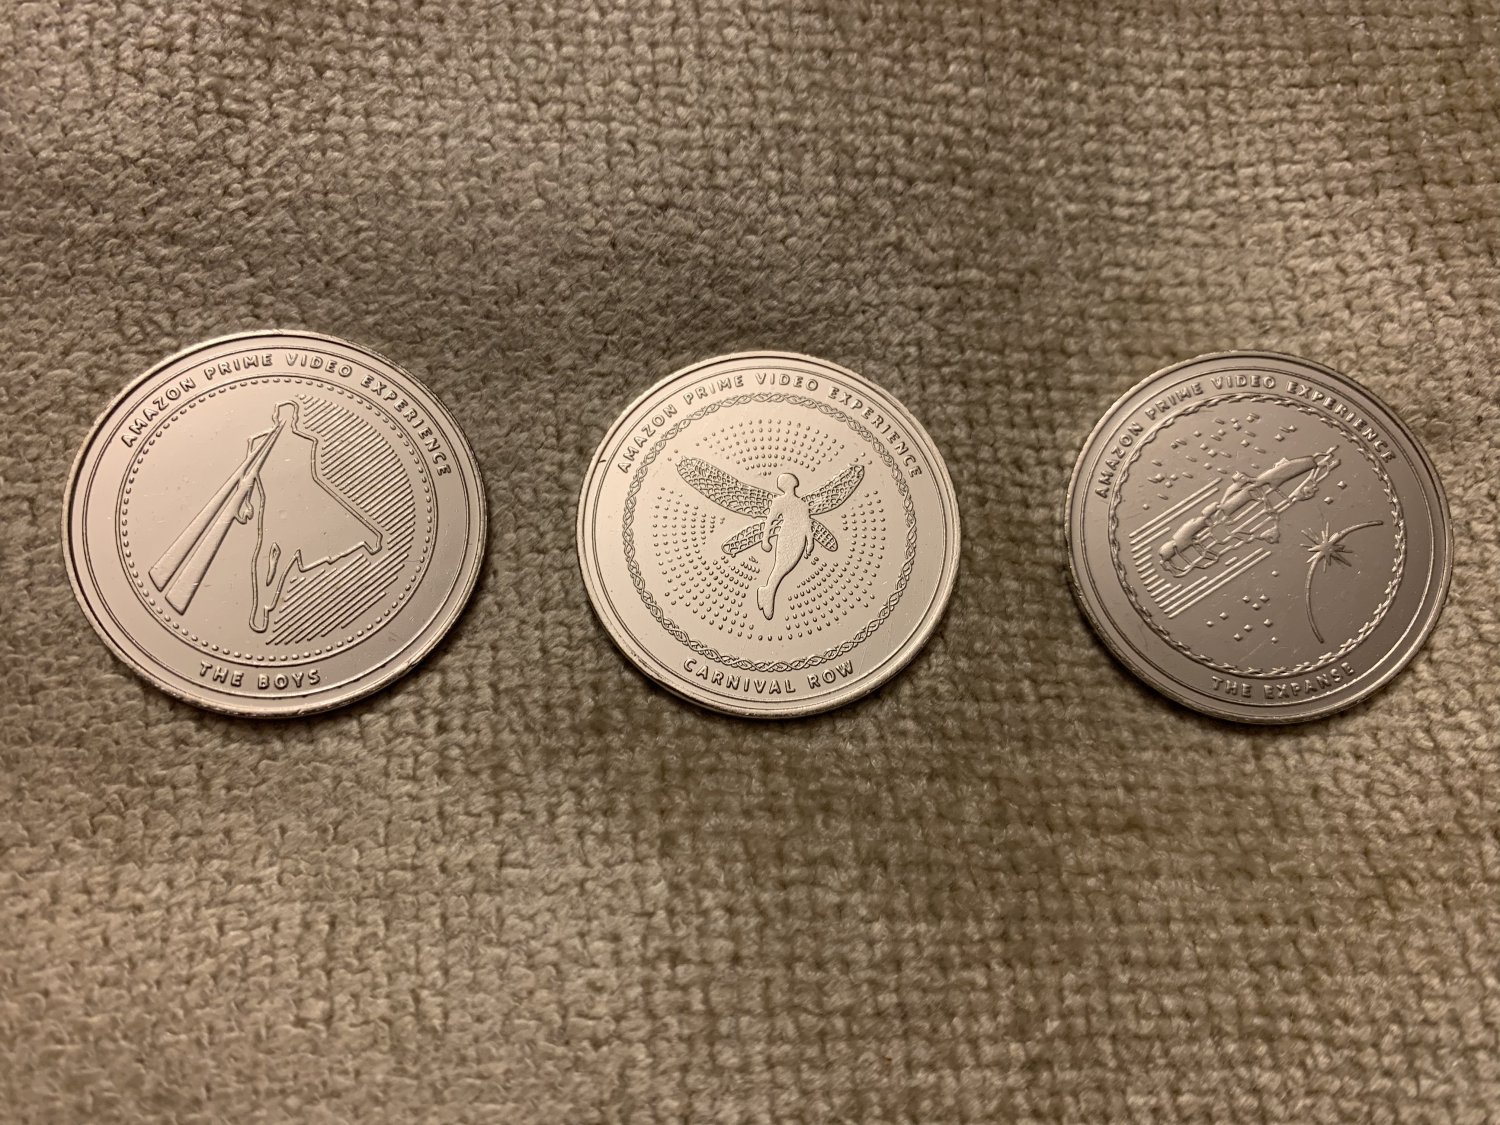 SDCC 2019 Amazon Prime Coins Tokens for The Boys, The Expanse, Carnival Row